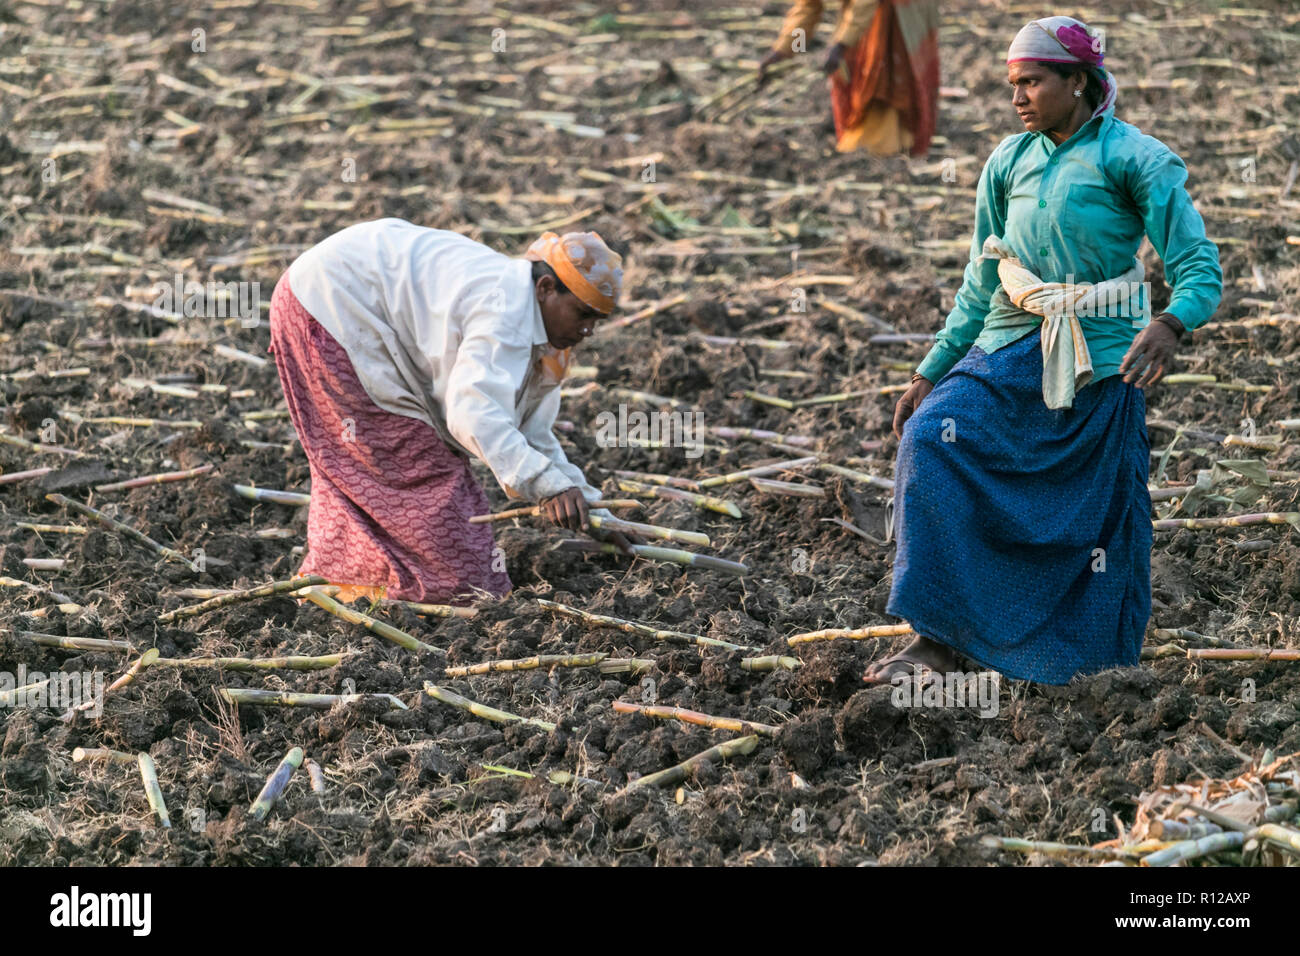 A view of Women farmer working in agriculture land in Anegundi,Koppal District,Karnataka,India on13th october 2018 Stock Photo